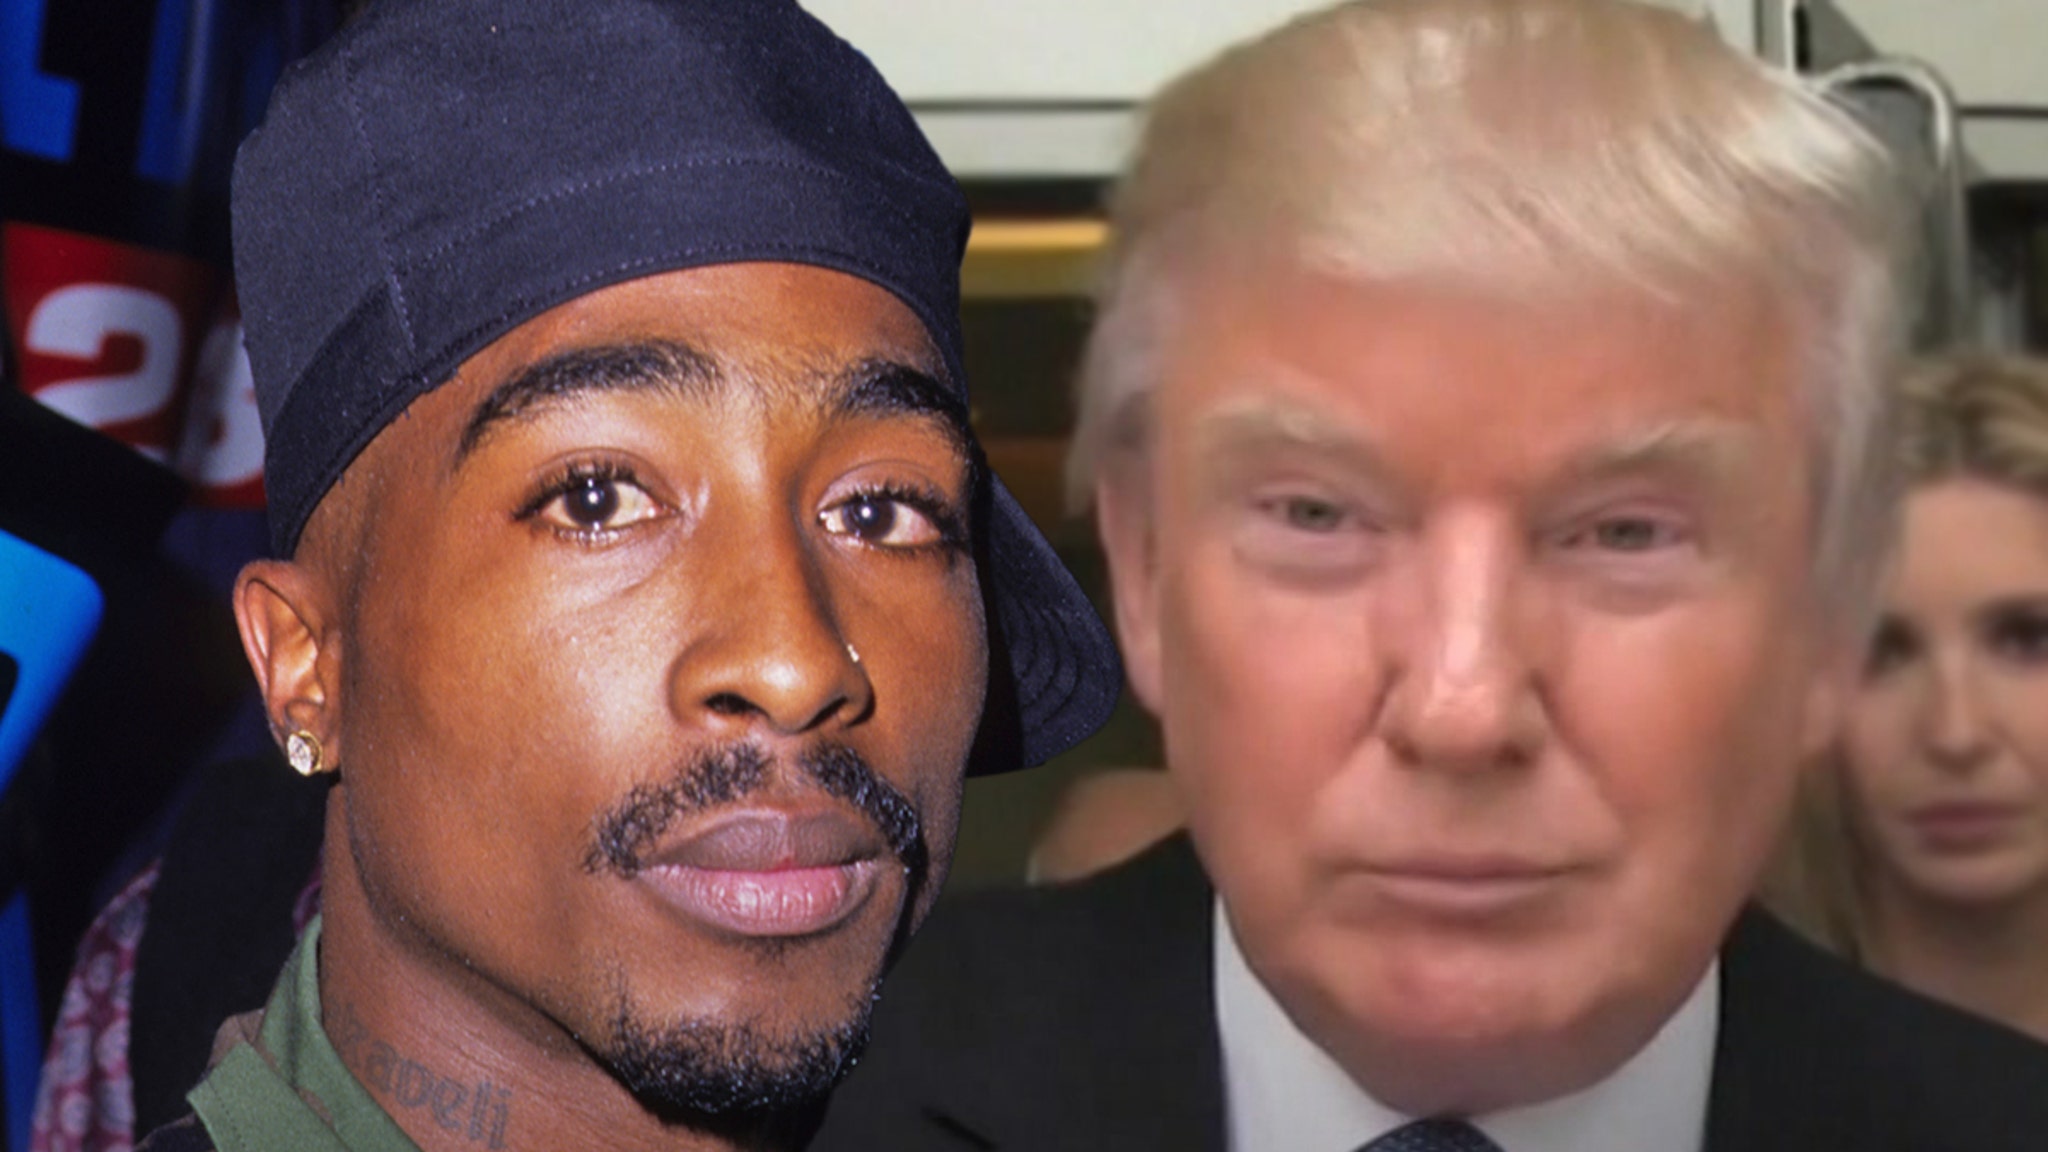 Tupac's sister slams Donald Trump's lawyer for comparing him to the rapper